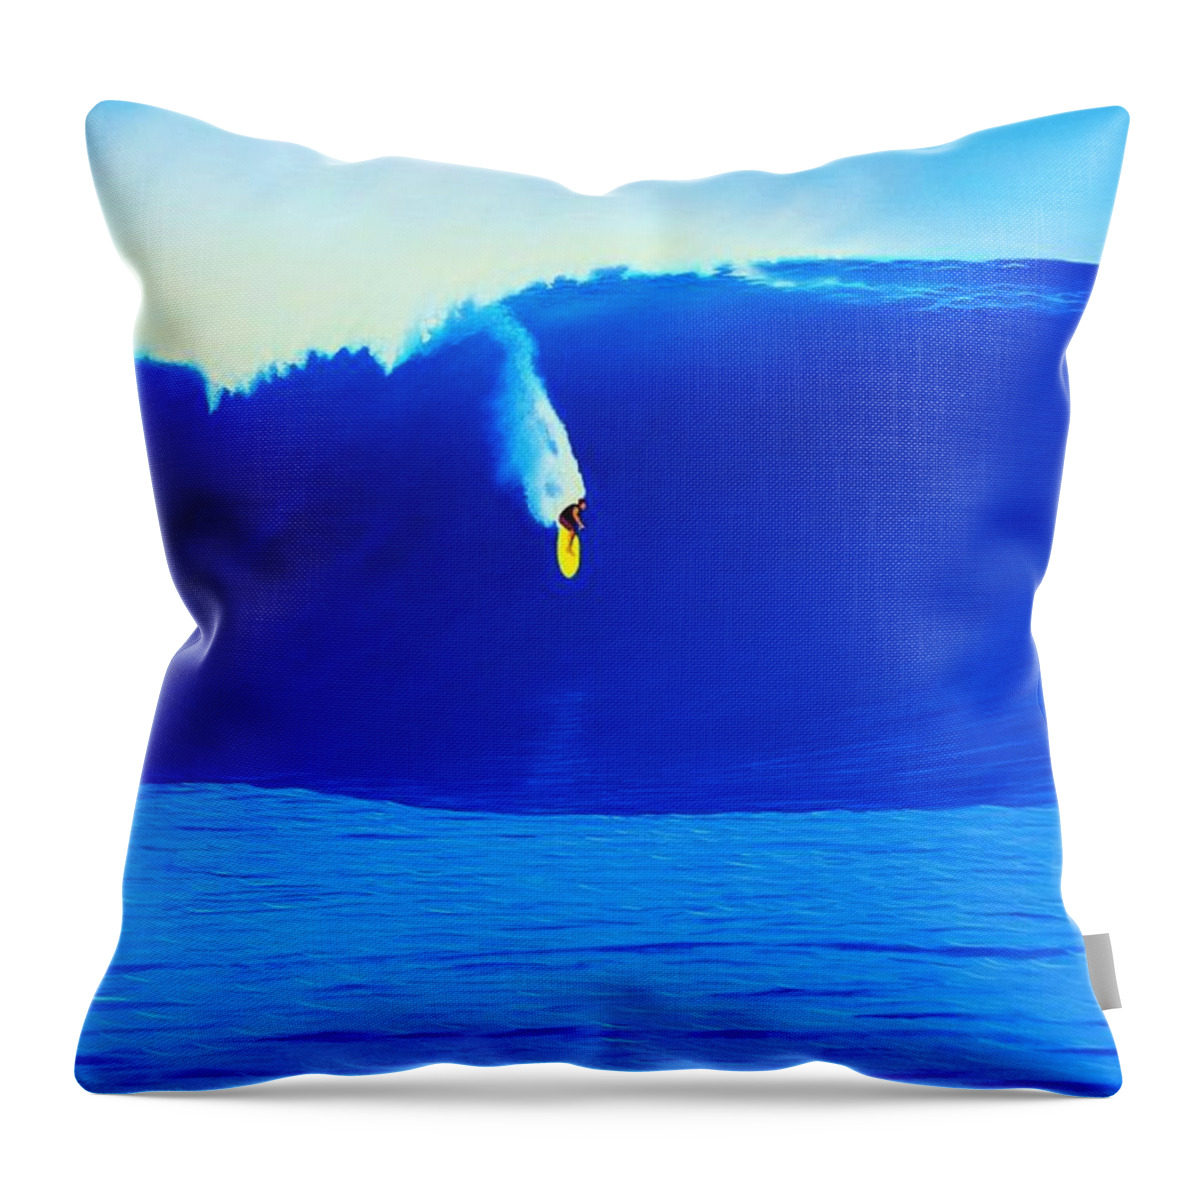 Surfing Throw Pillow featuring the painting Himalayas 2010 by John Kaelin